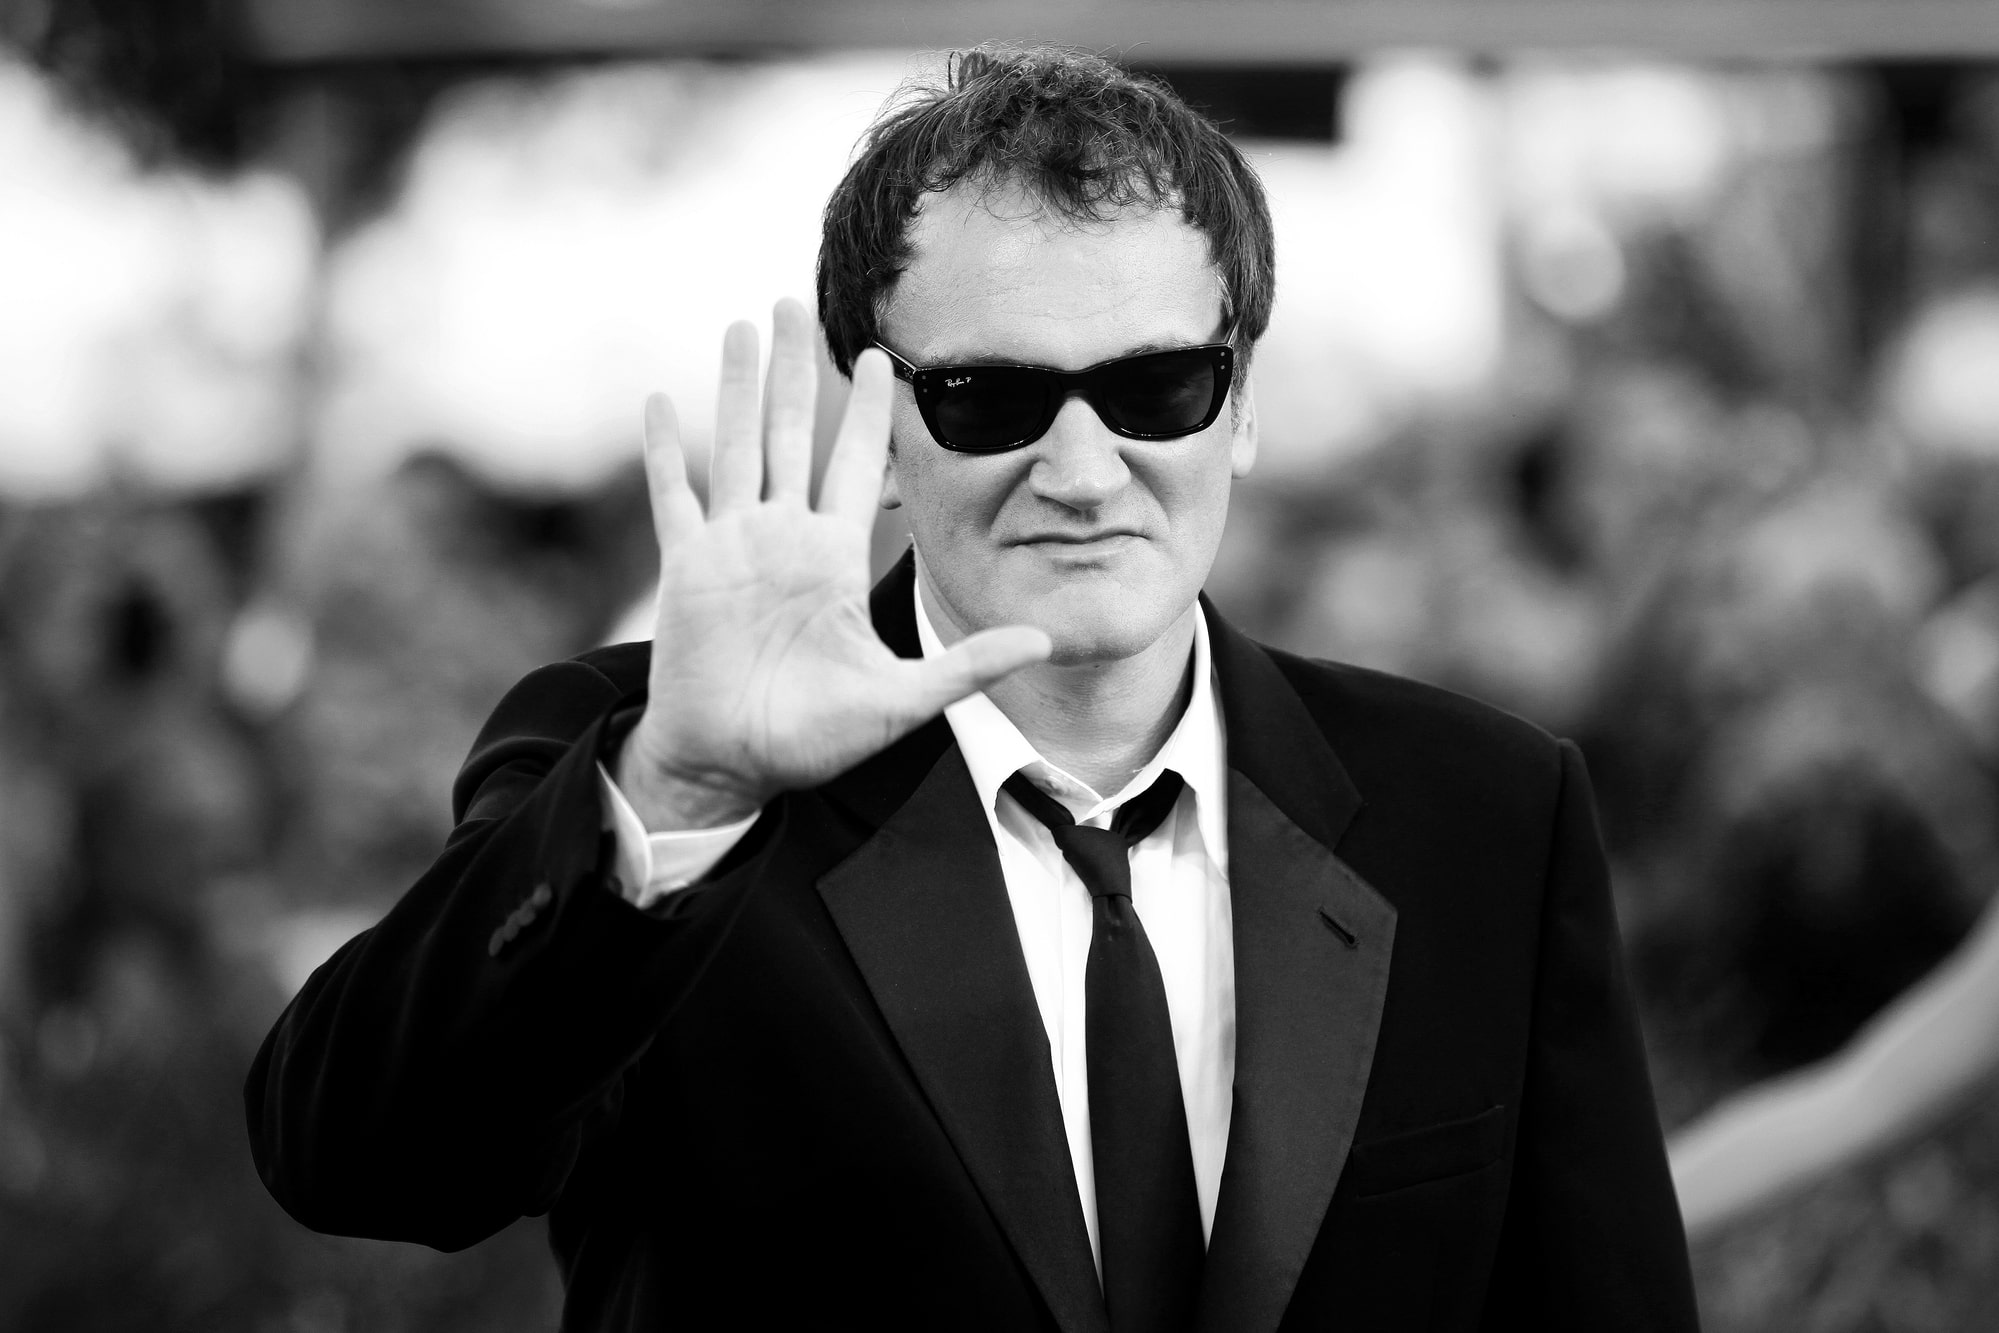 Miramax sues Quentin Tarantino over ‘Pulp Fiction’ NFT collection